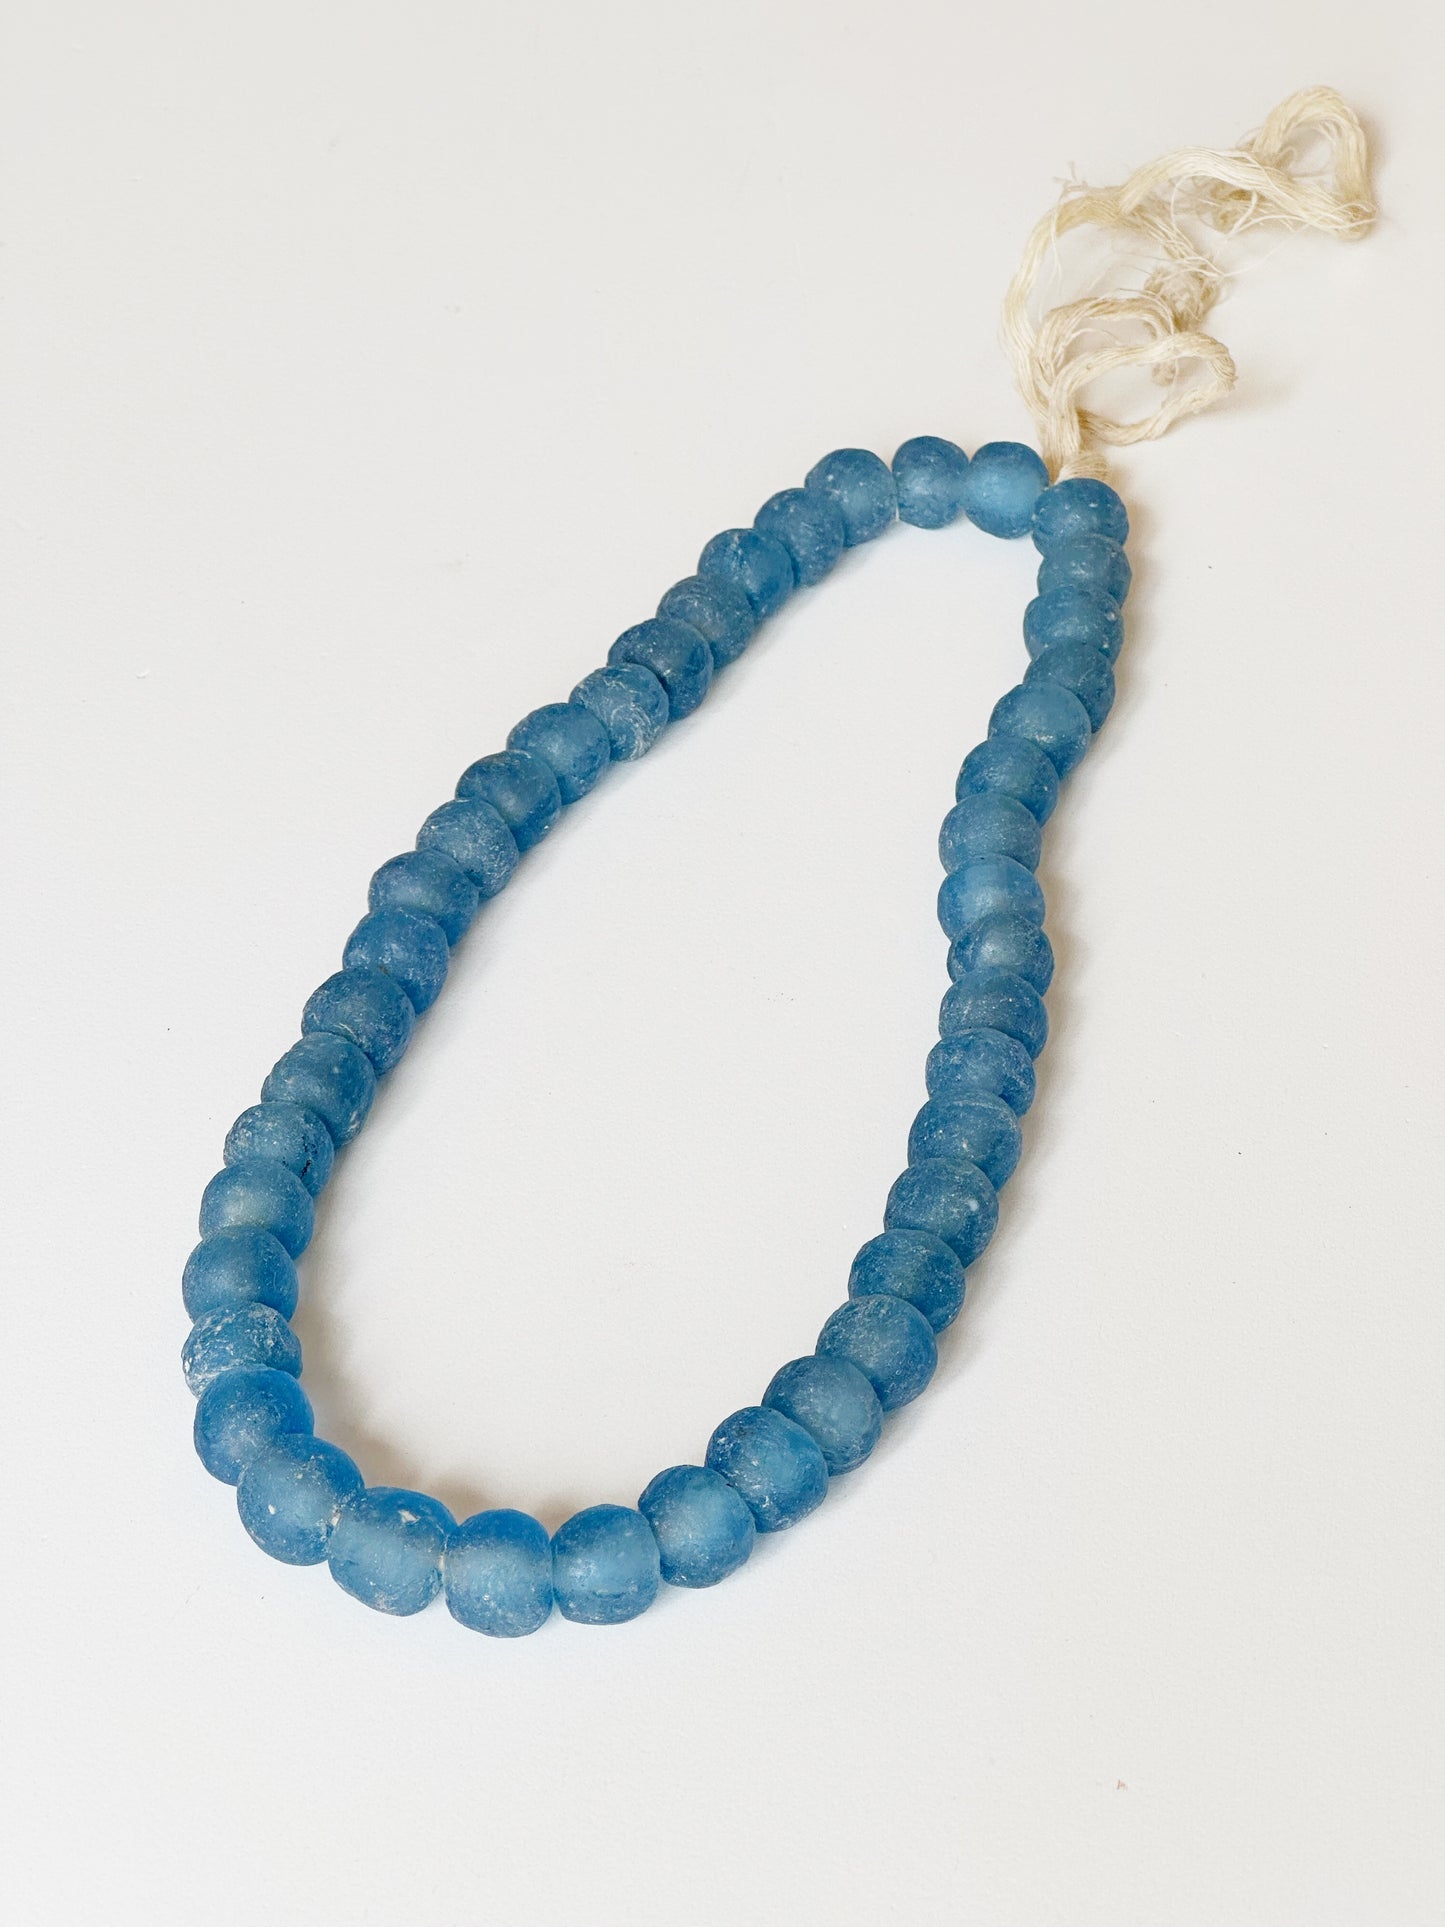 Recycled Glass Beads, Blue, Small